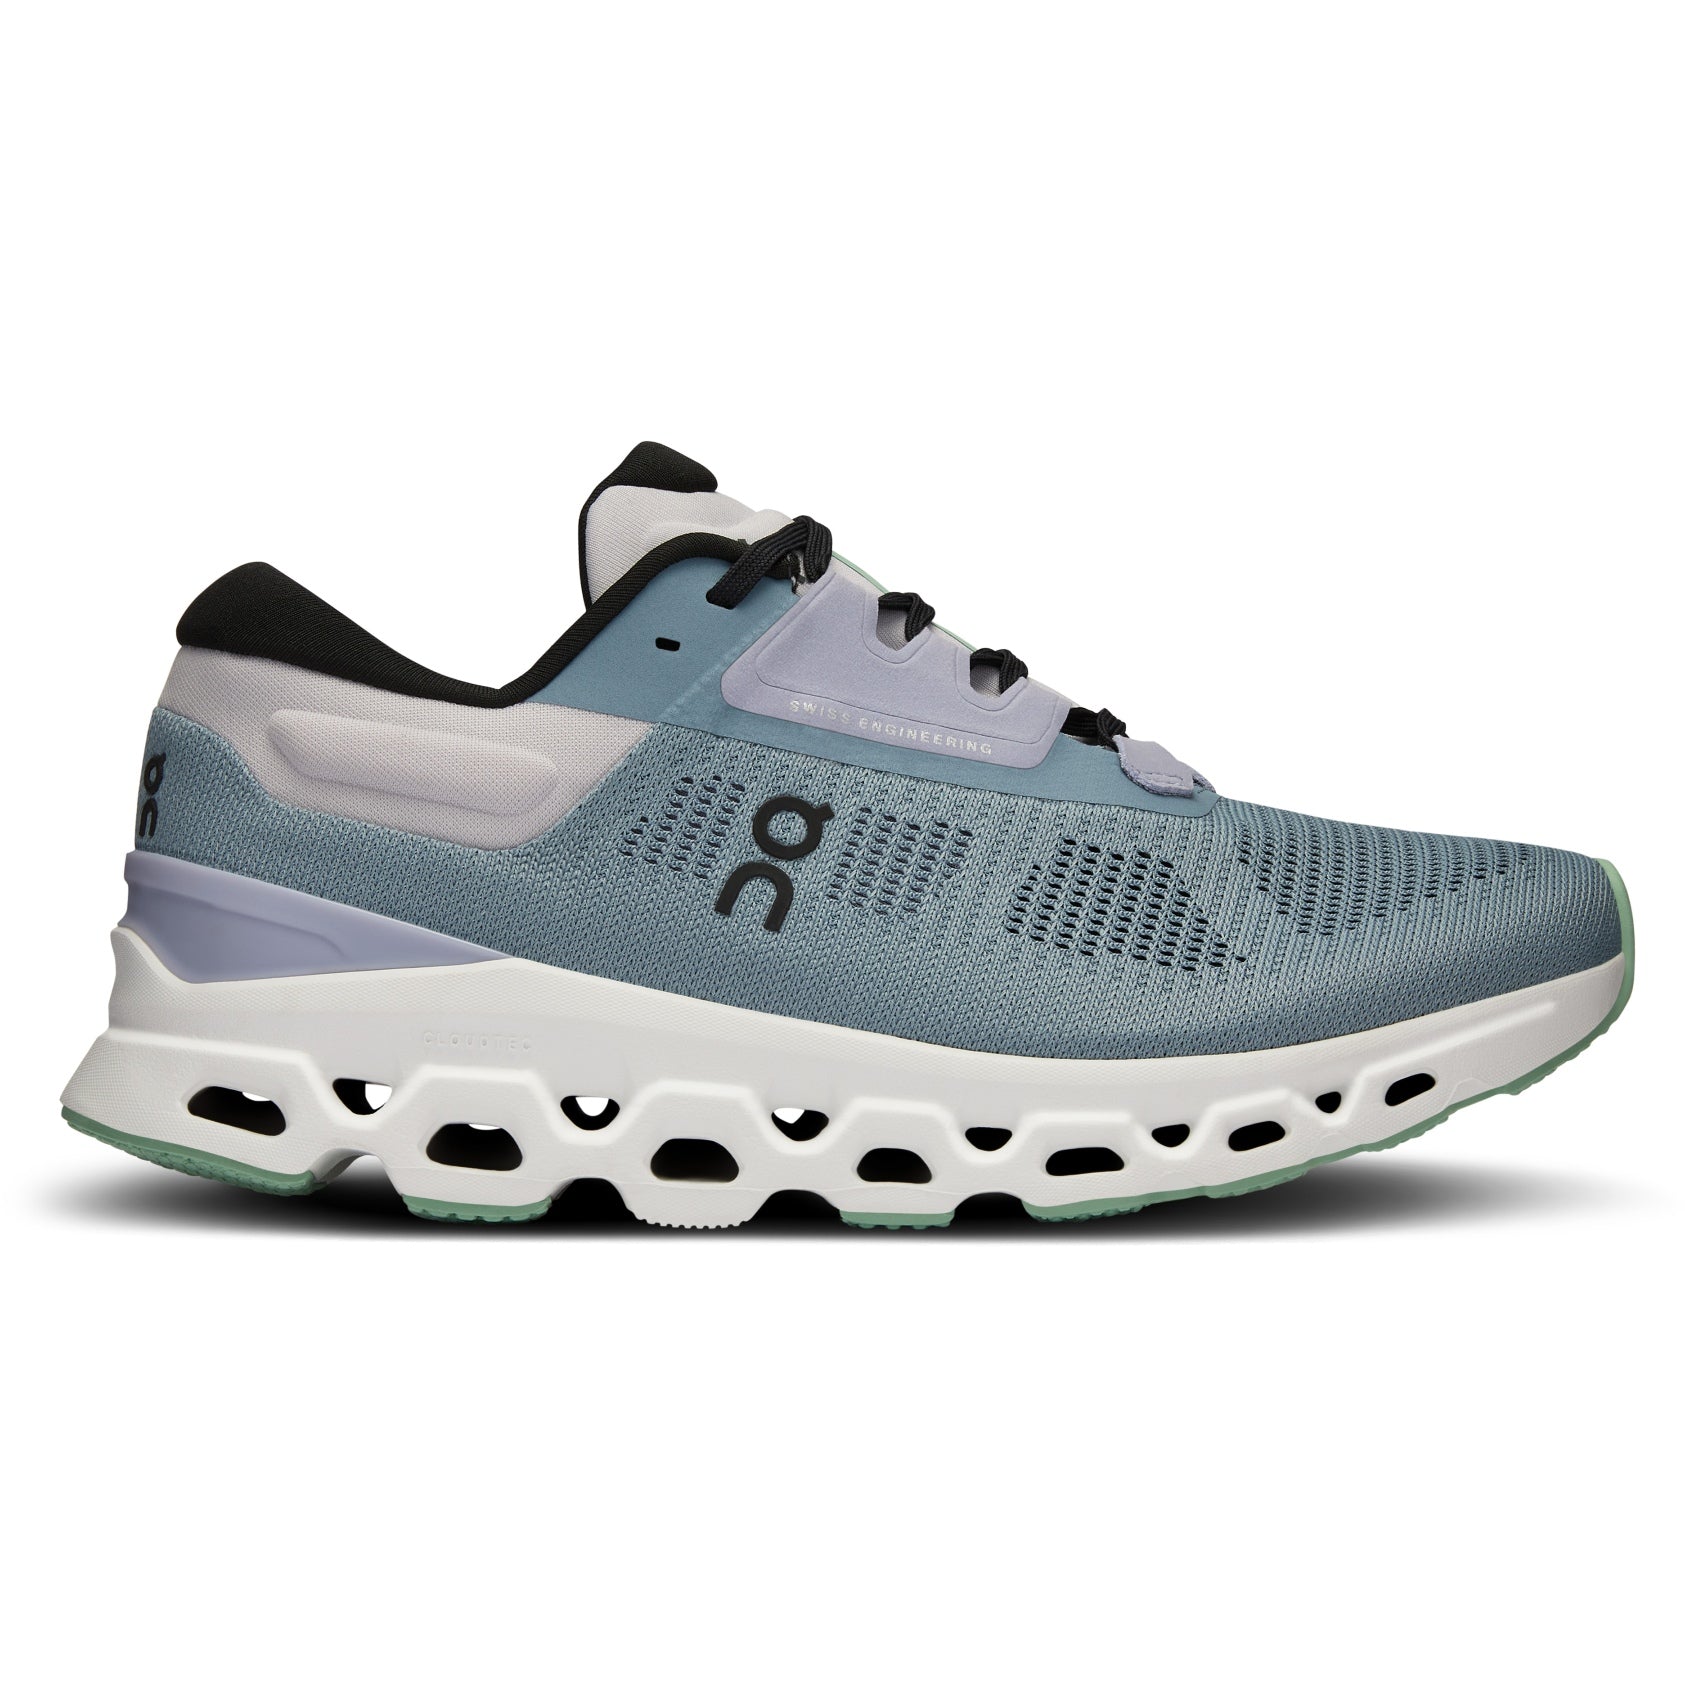 Lateral view of the Women's Cloudstratus 3 by On in the color Wash/Nimbus